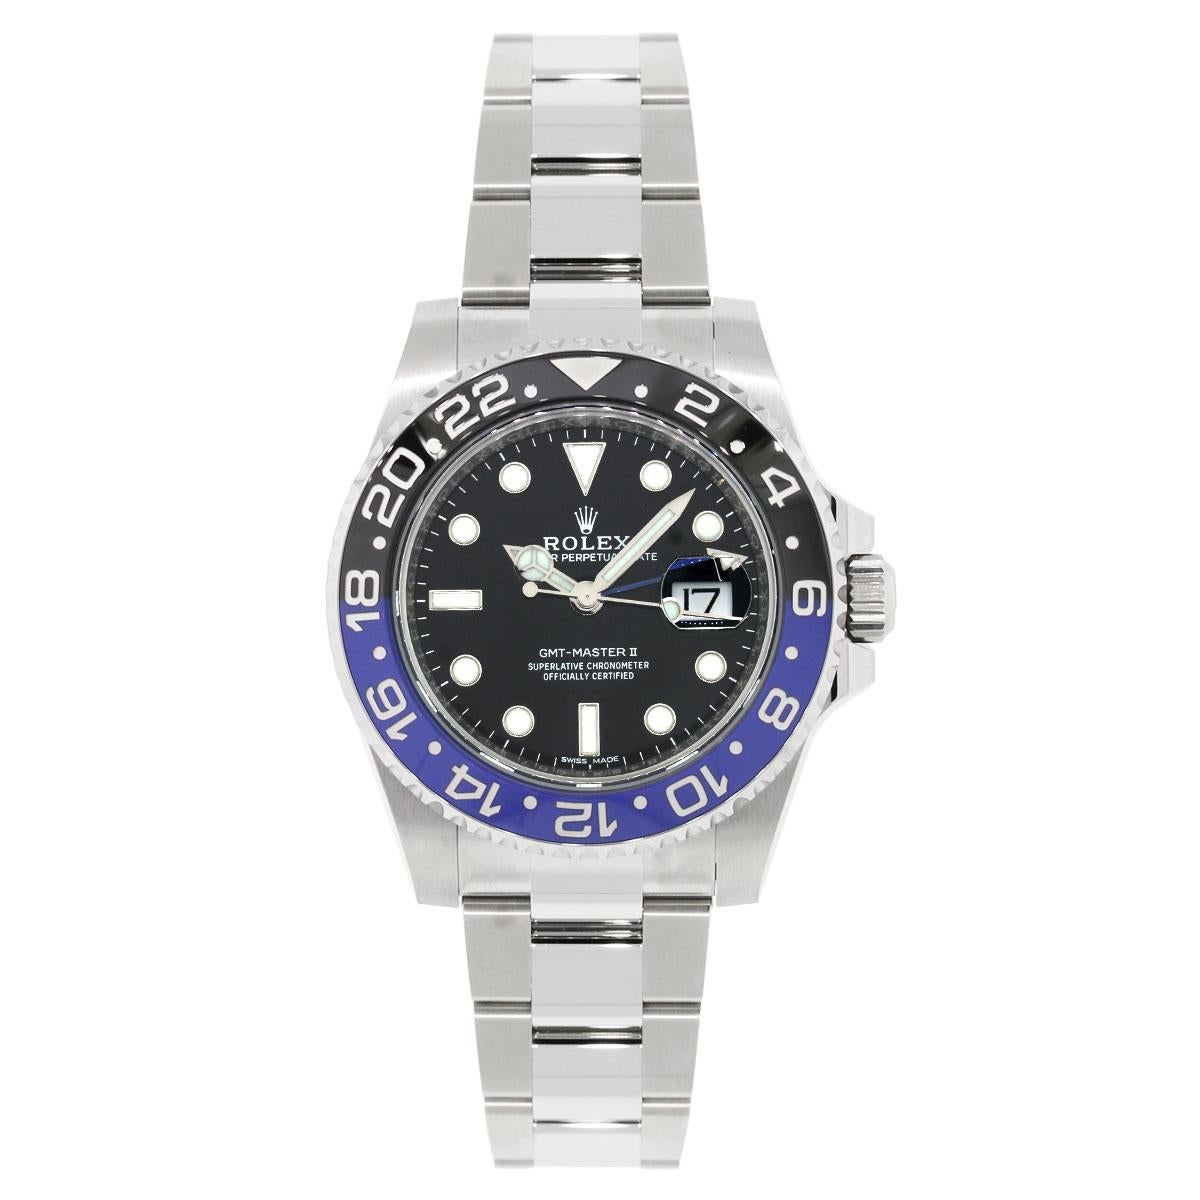 Brand: Rolex
MPN: 116710
Model: Master GMT II “Batman”
Case Material: Stainless steel
Case Diameter: 40mm
Crystal: Sapphire crystal
Bezel: Unidirectional black and blue ceramic bezel
Dial: Black dial with luminescent hour markers and